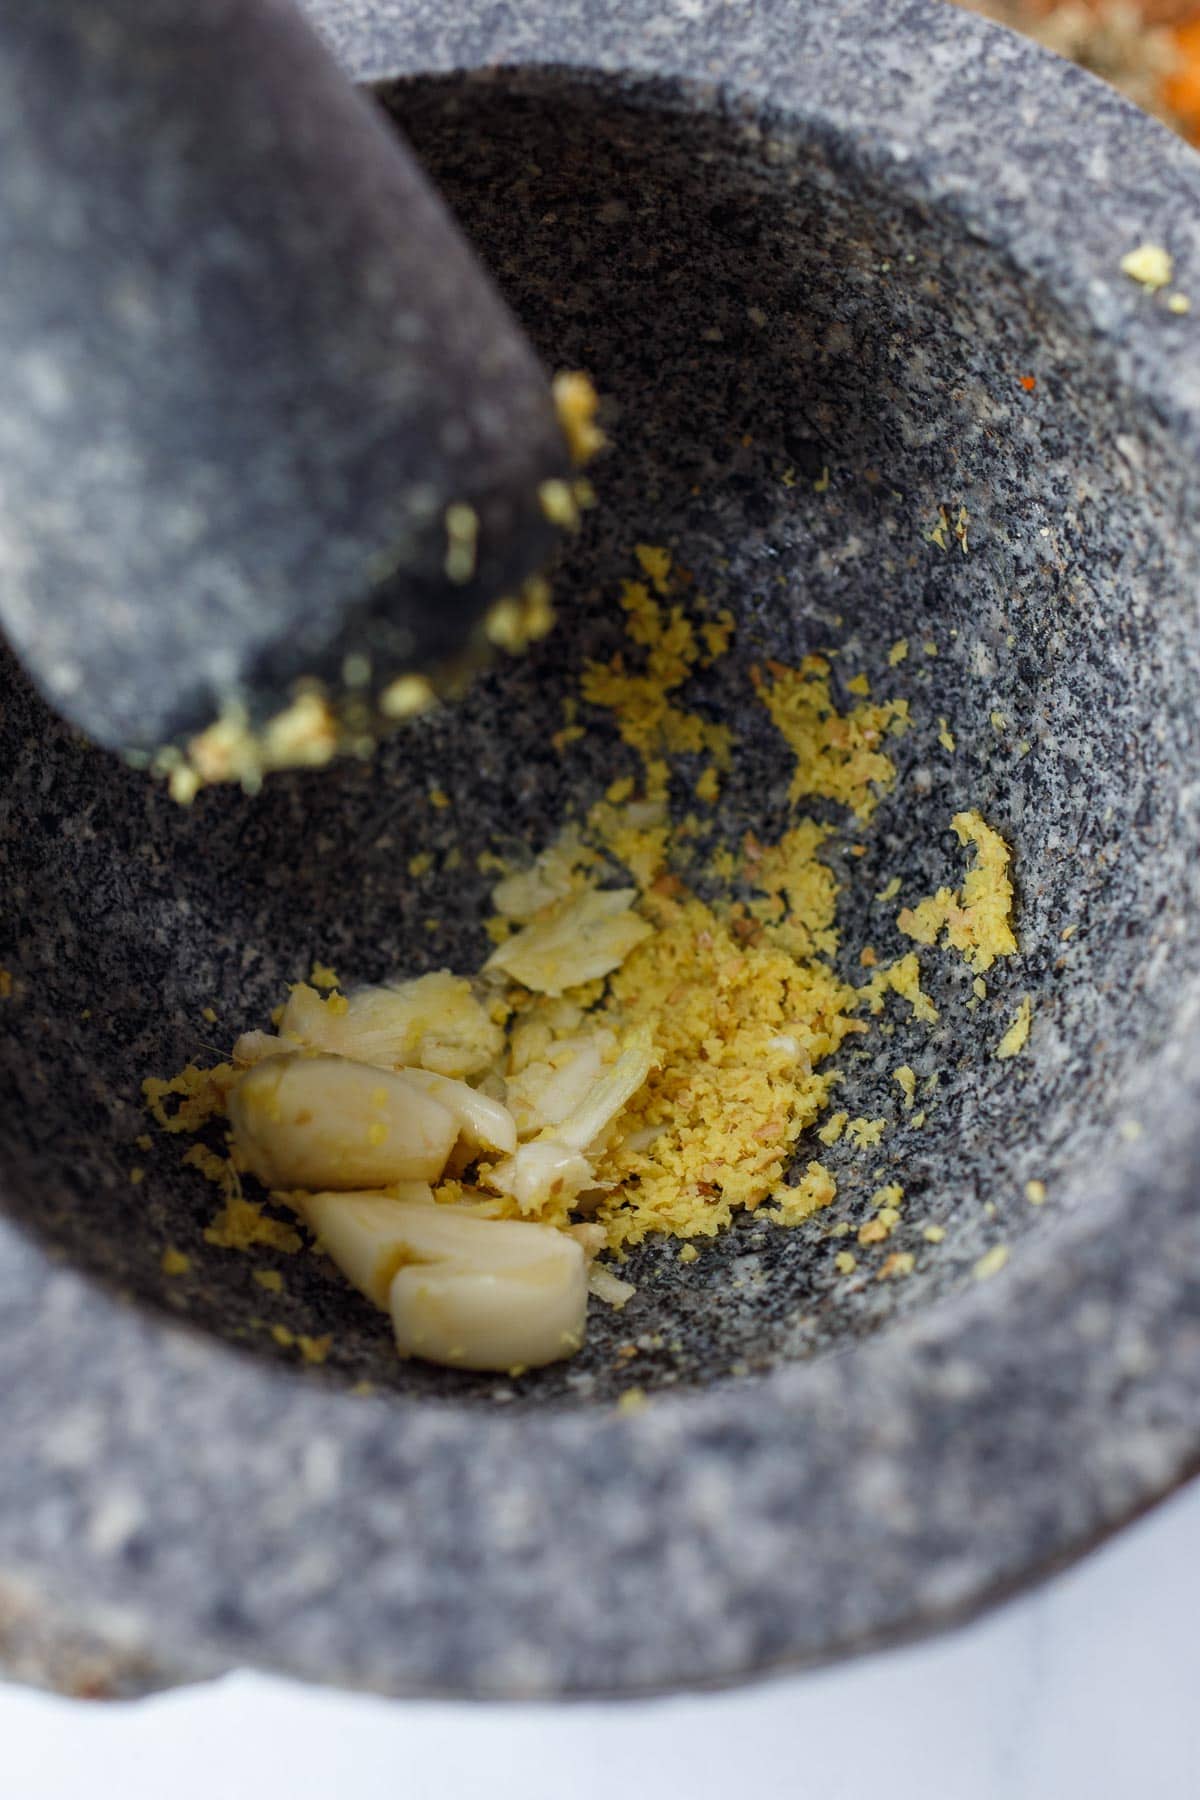 Garlic and ginger in mortar and pestle.